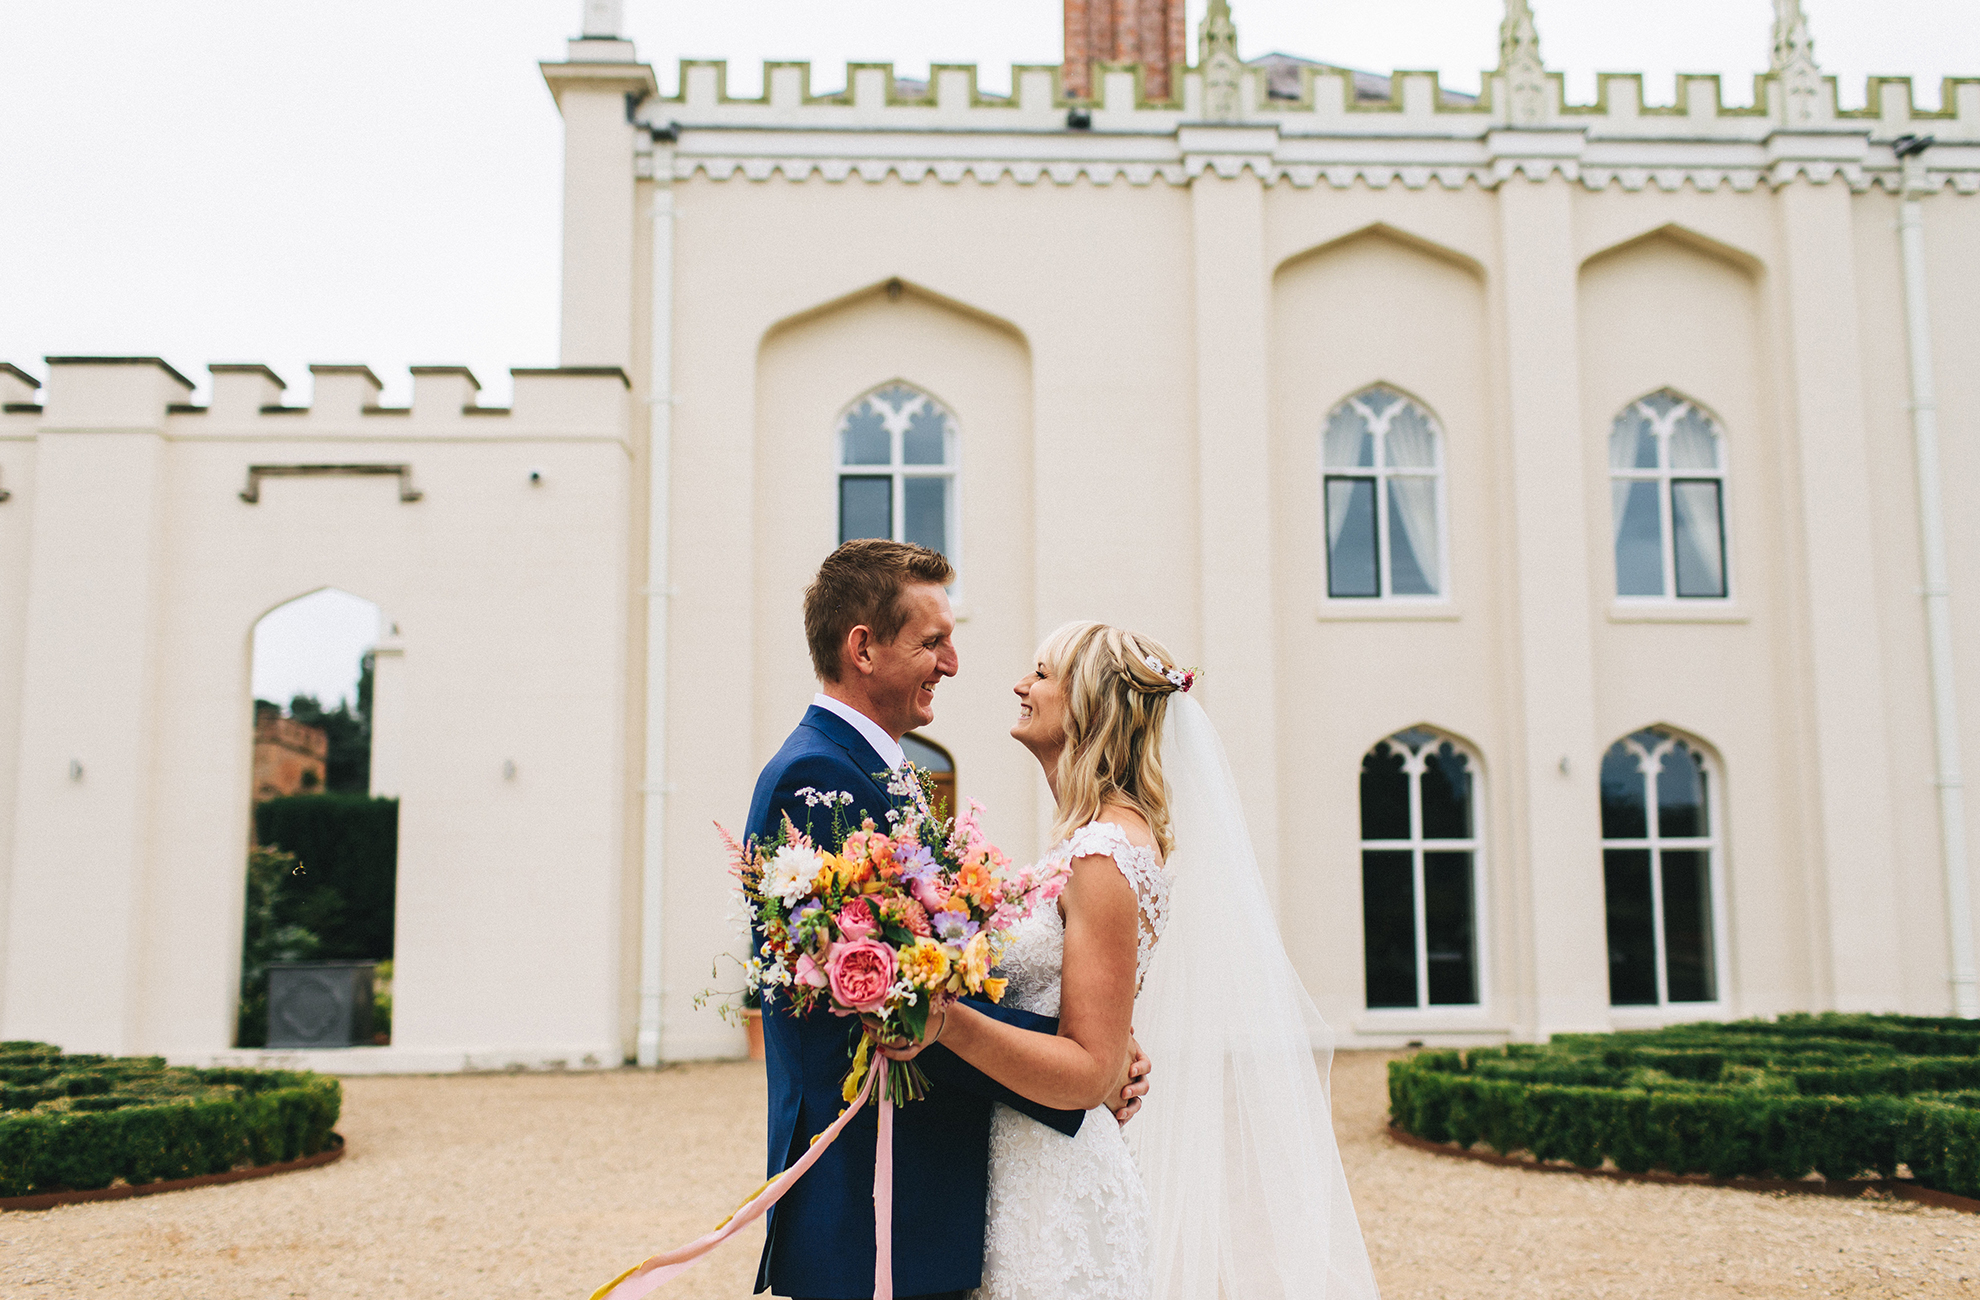 A bride and groom explore the grounds at Combermere Abbey on their wedding day